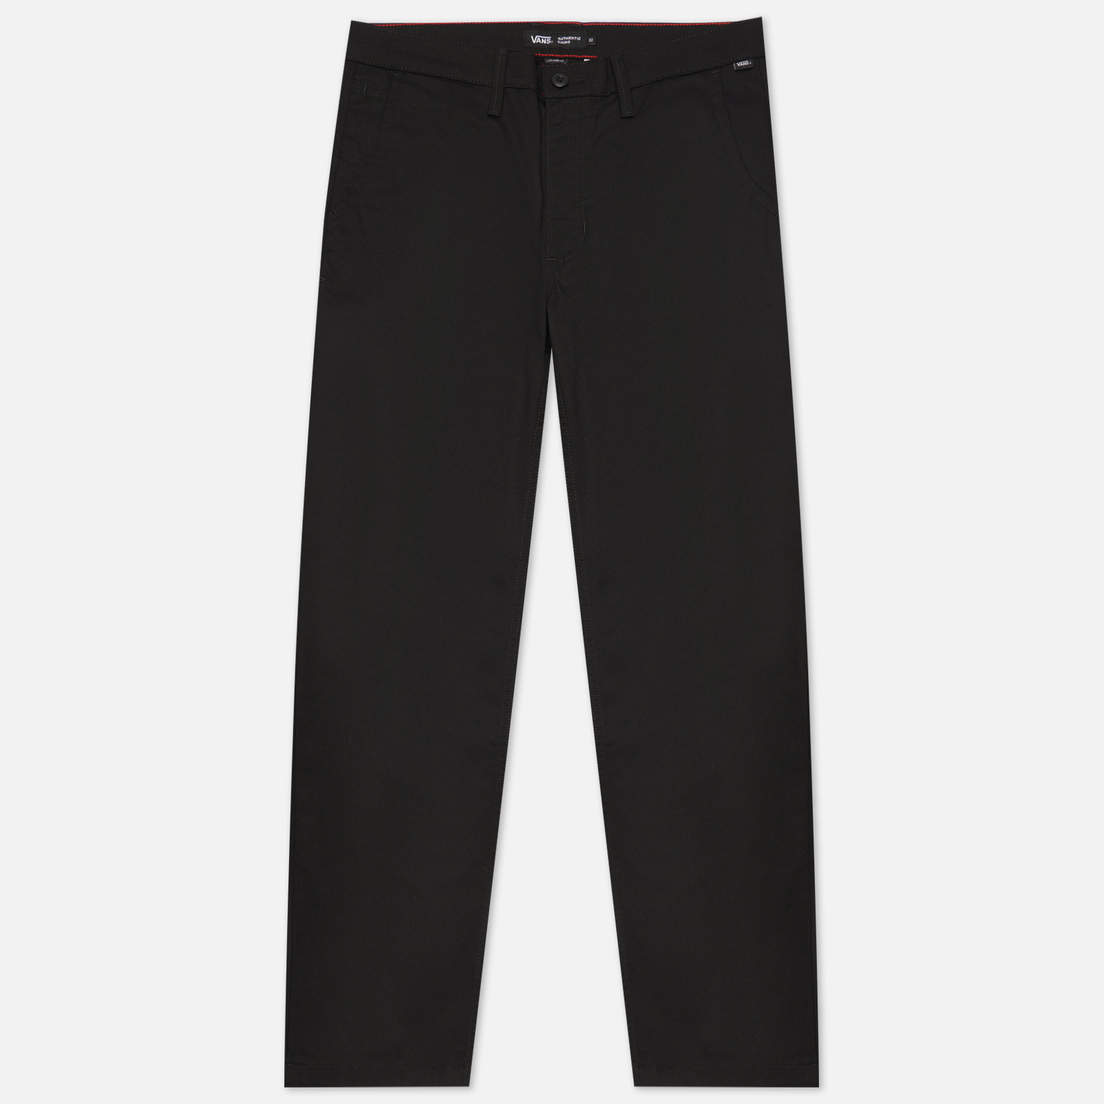 Vans Мужские брюки Authentic Chino Relaxed